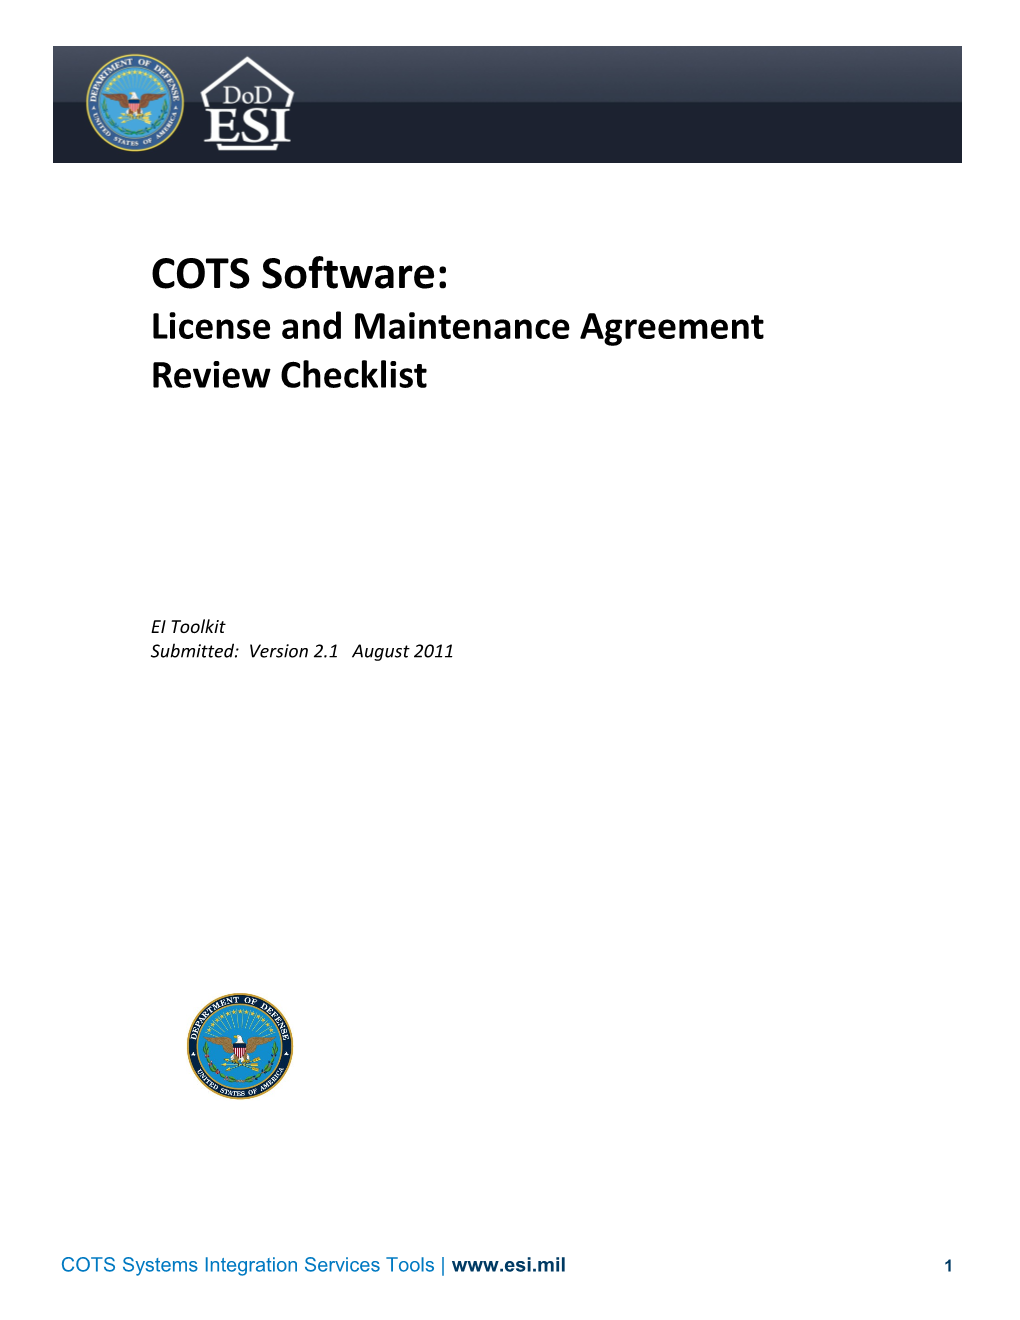 License and Maintenance Agreement